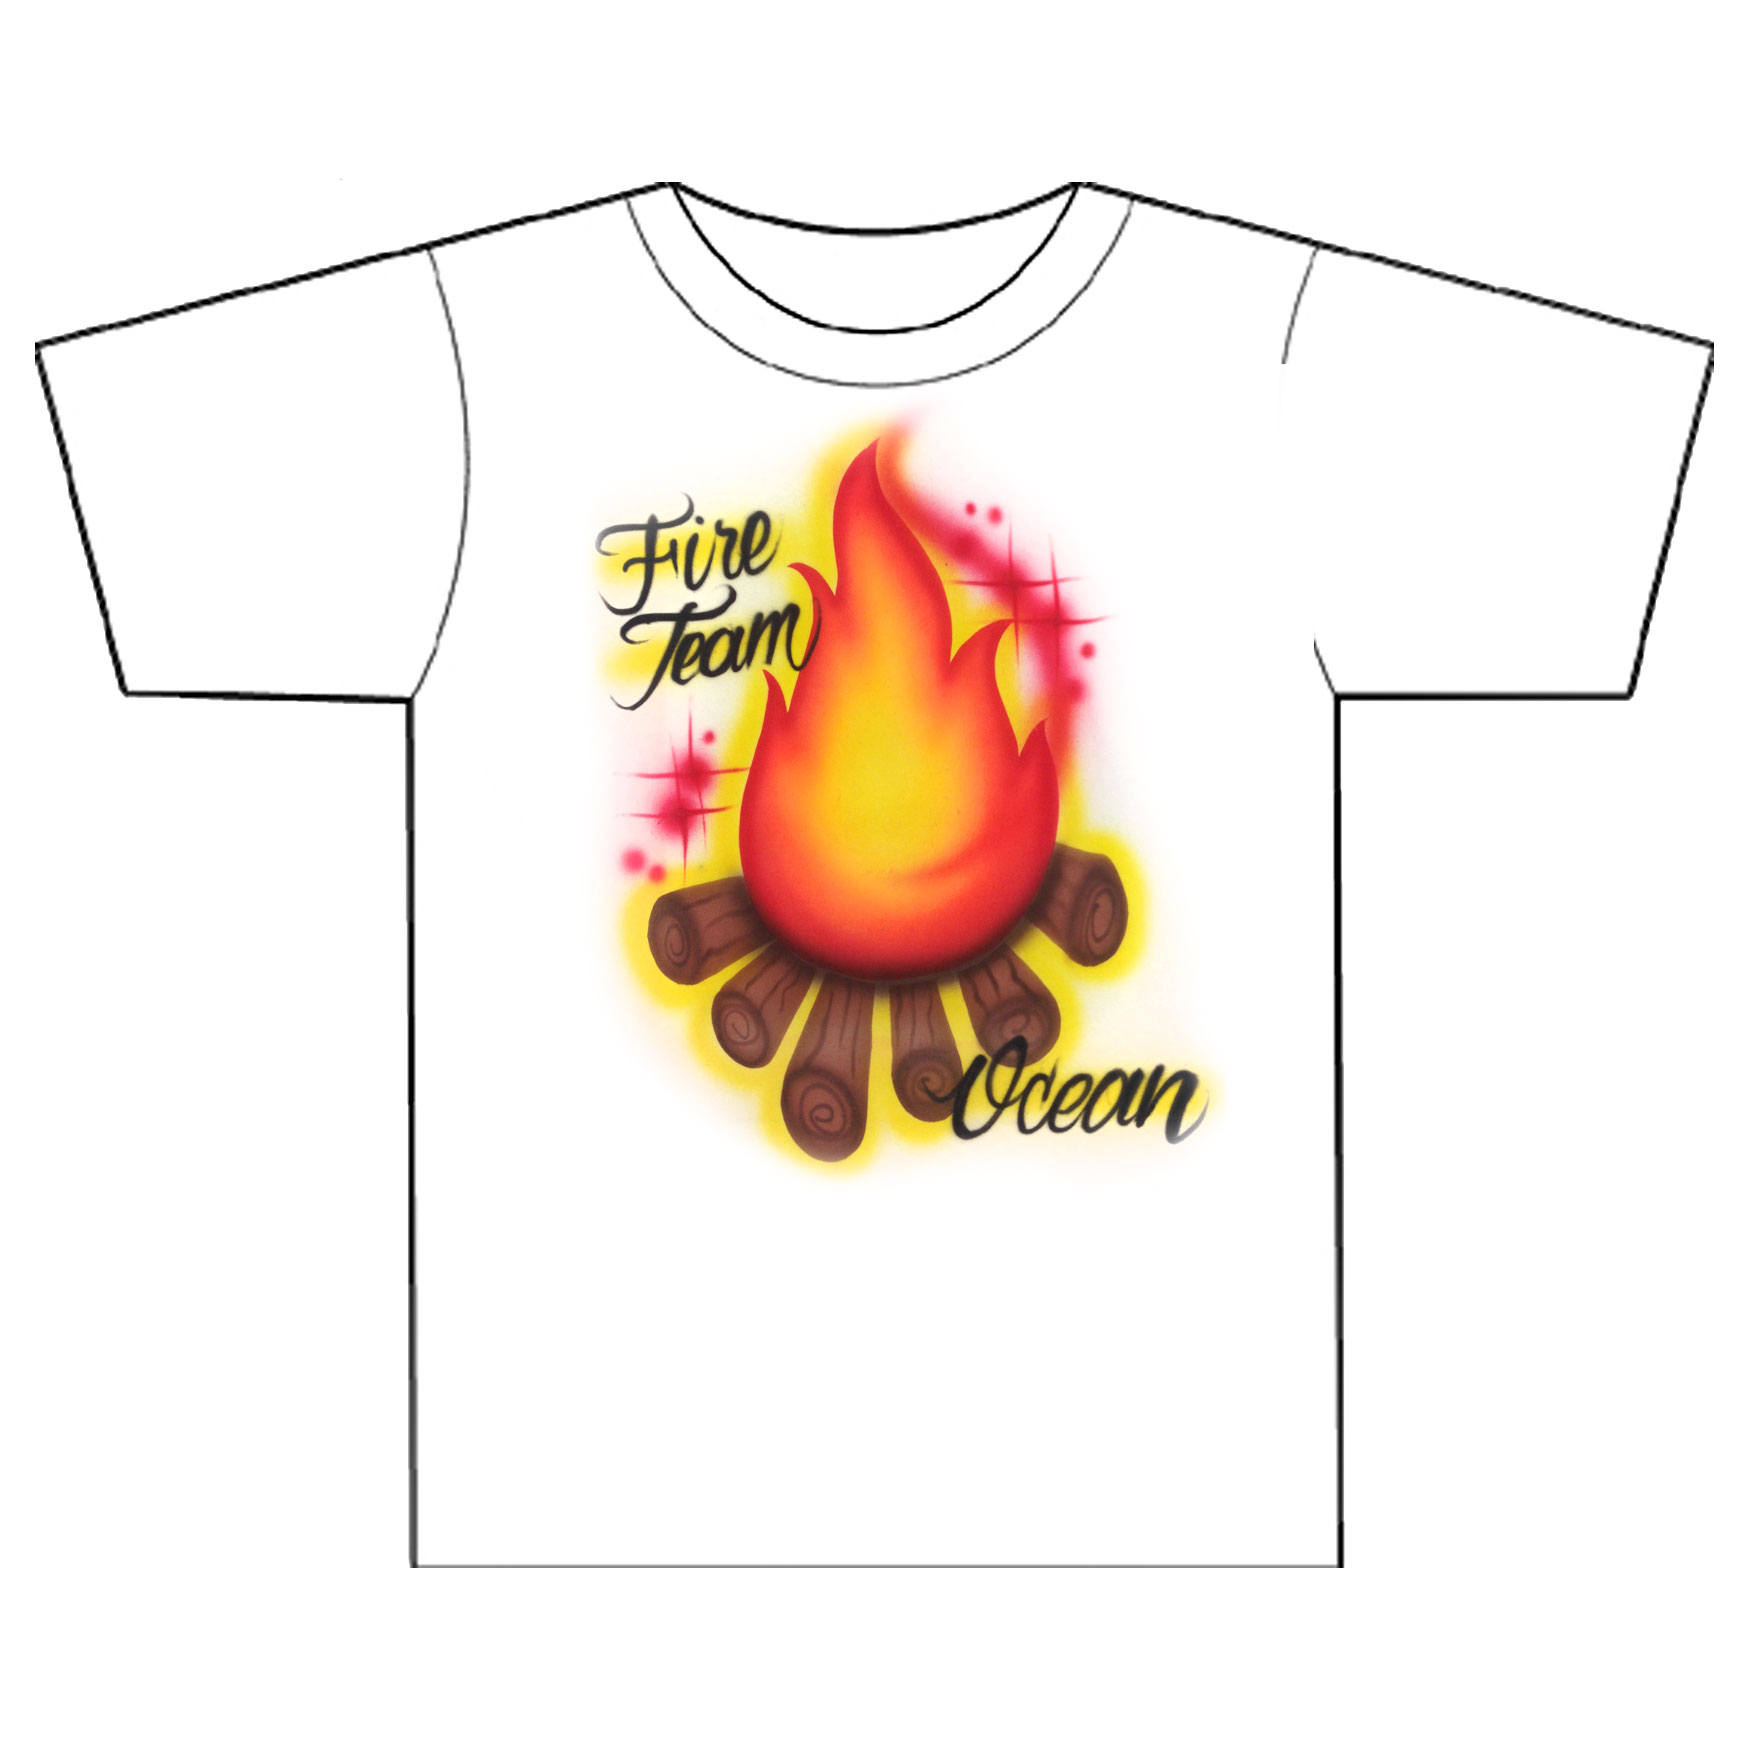 Airbrushed Campfire Shirt with any name and text you'd like